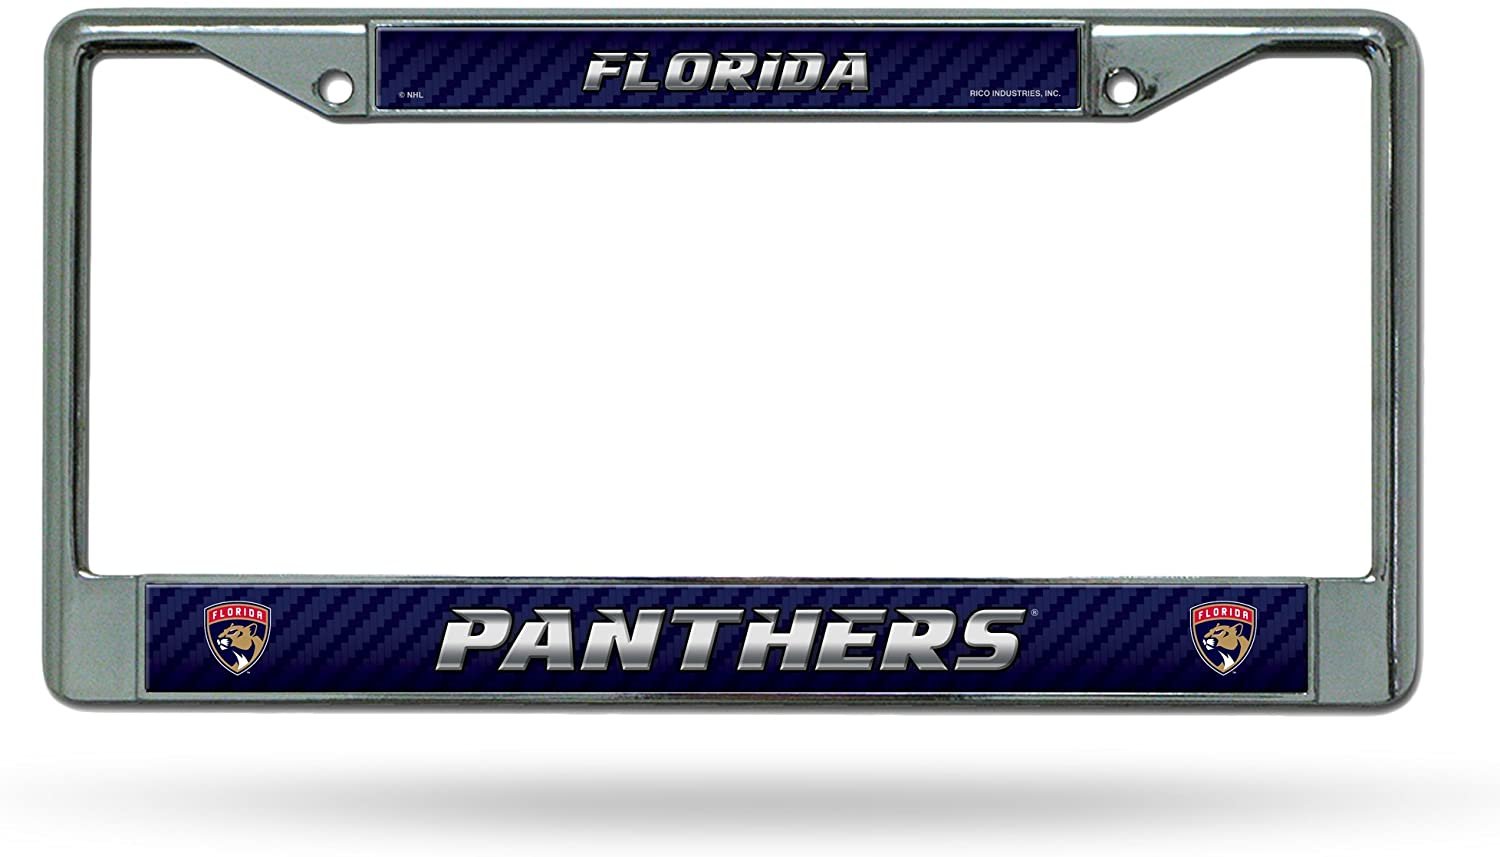 Florida Panthers Premium Metal License Plate Frame Chrome Tag Cover, 12x6 Inch